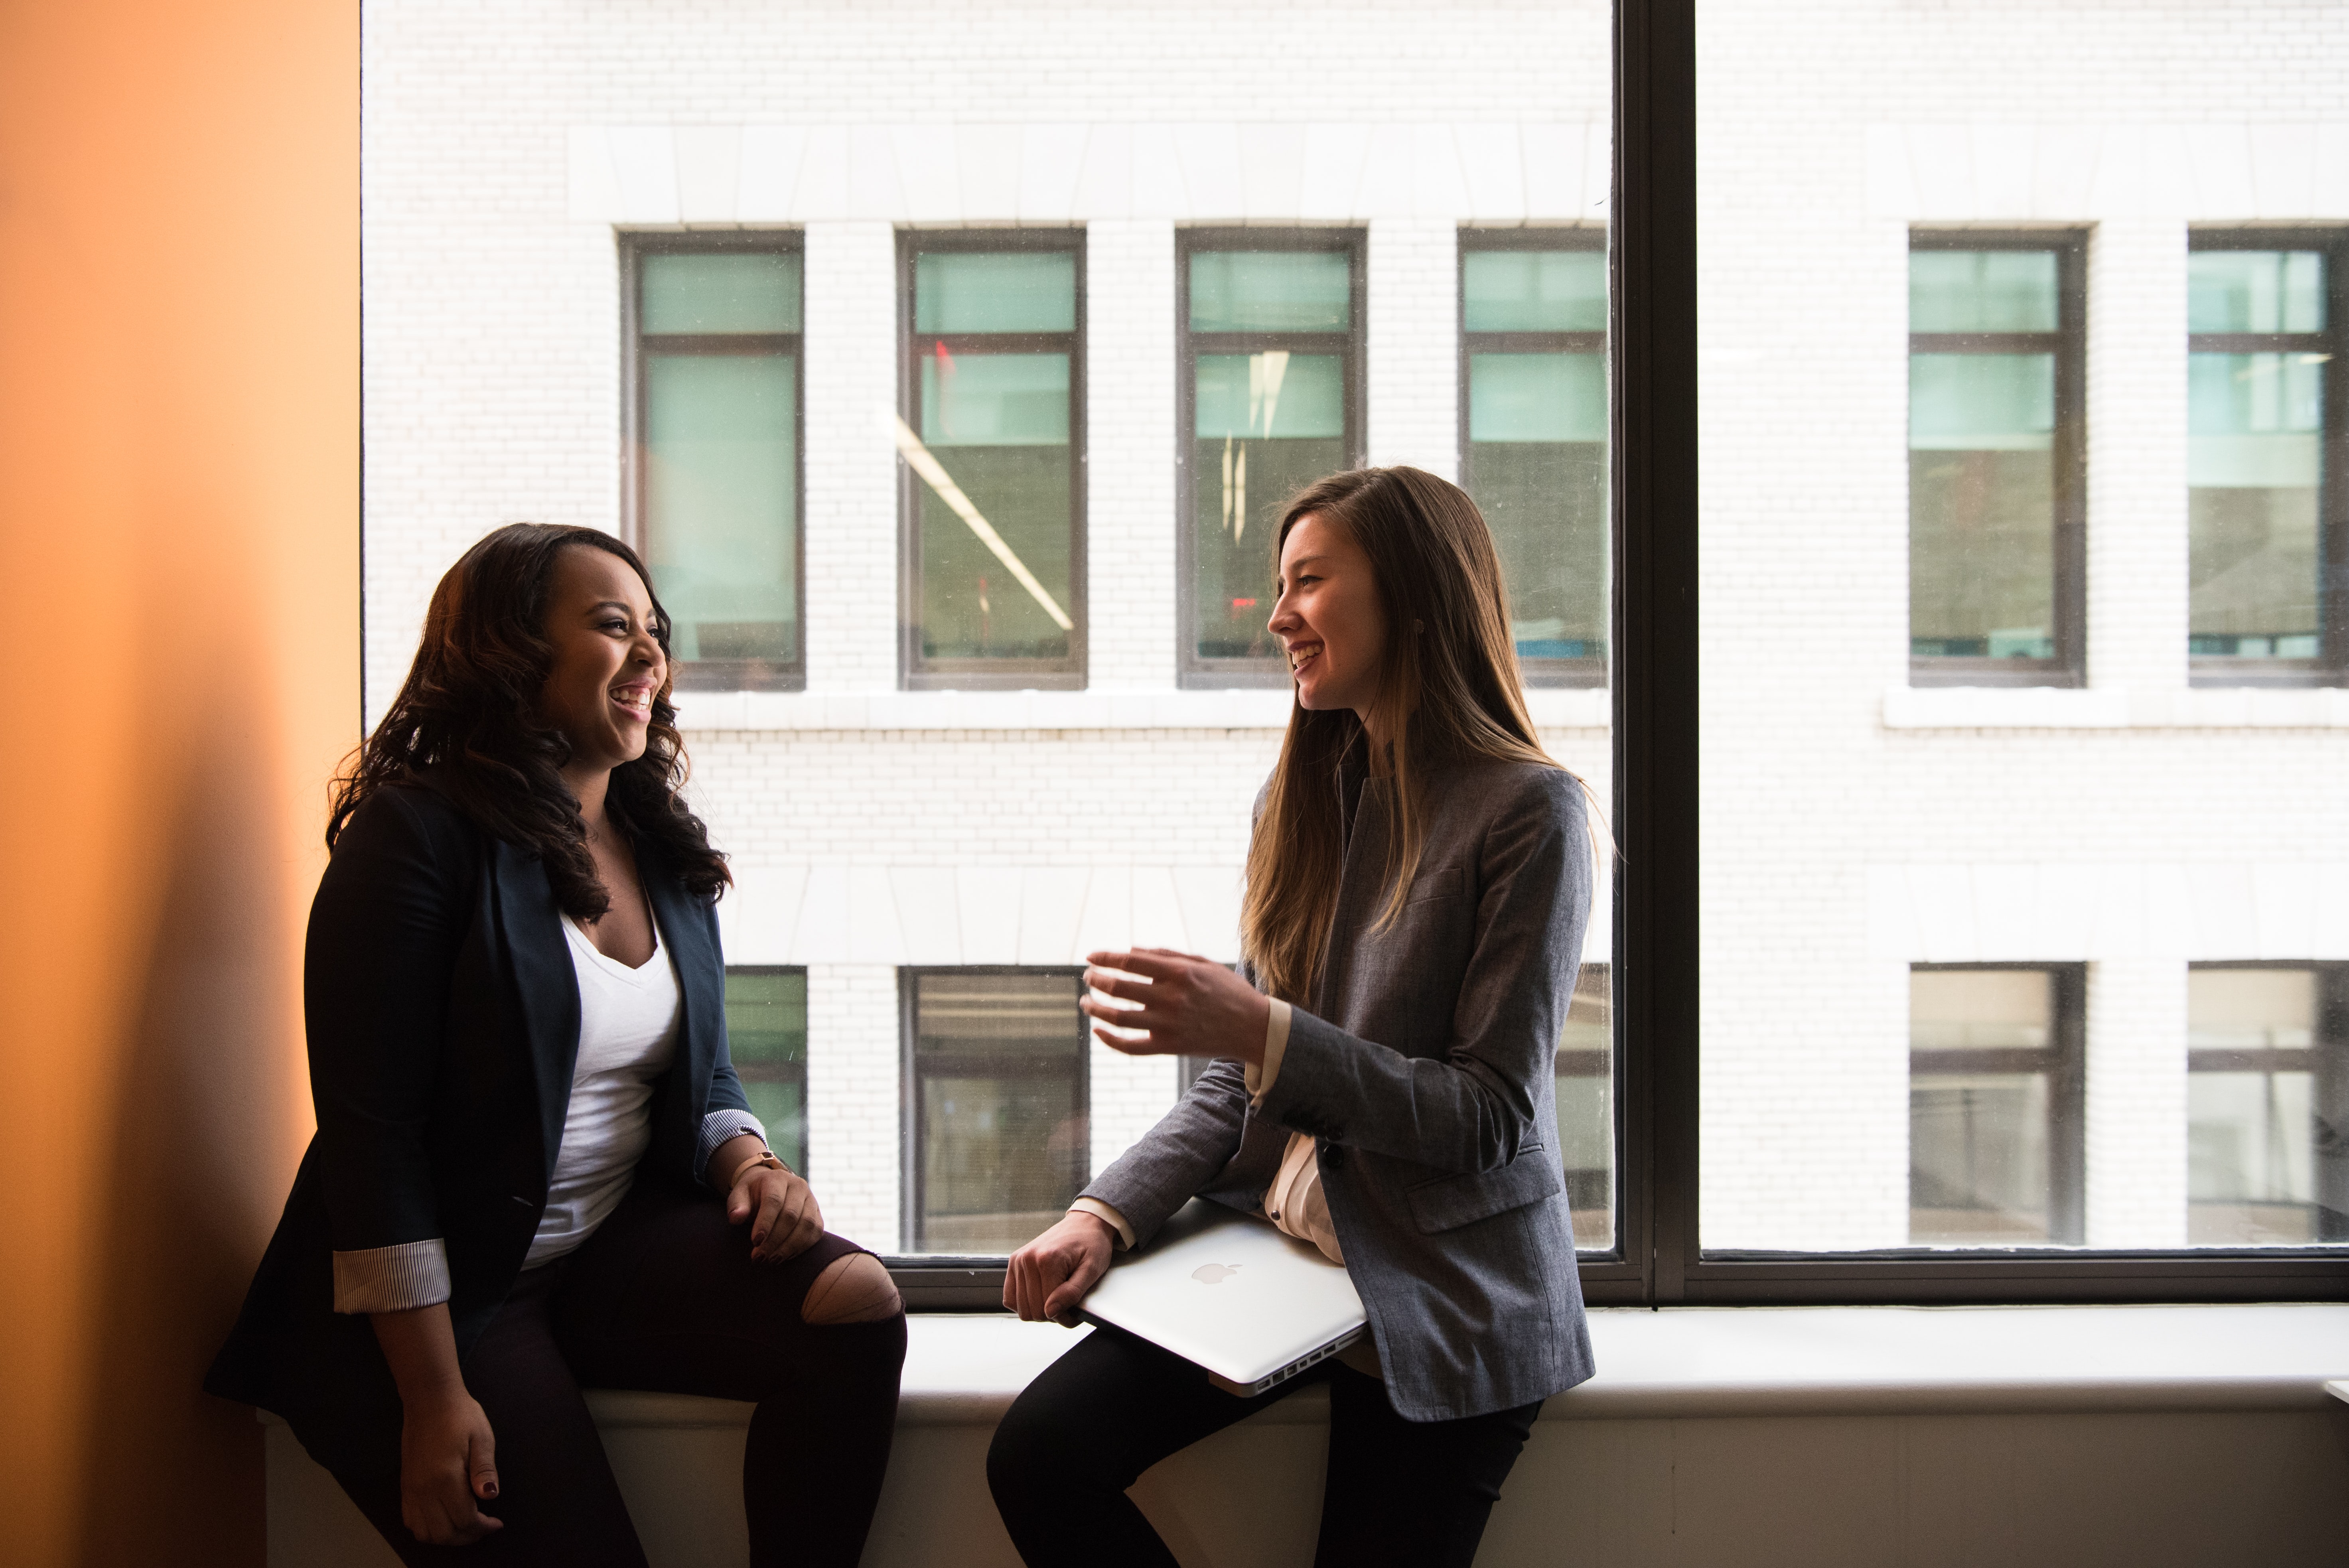 Two business women, talking to one another and smiling, sitting by a window within an inner city office.